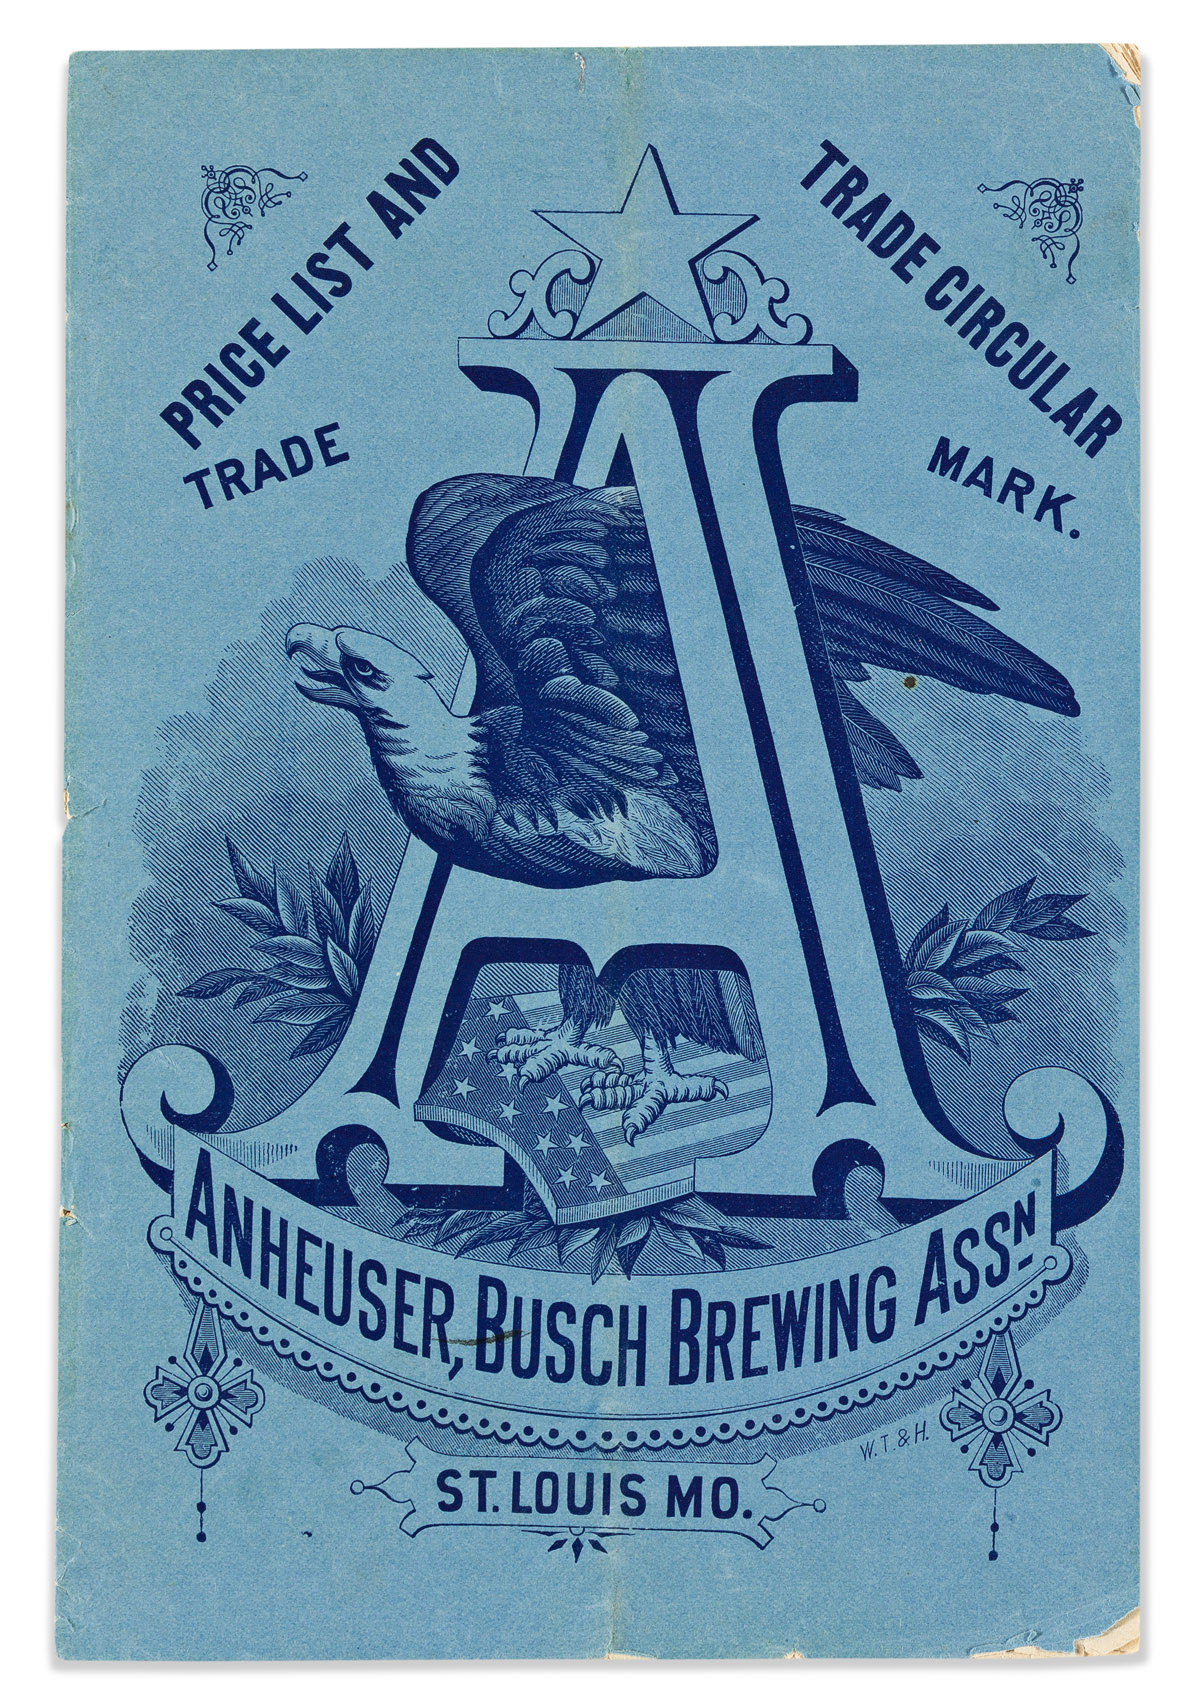 (FOOD & DRINK.) Early catalog and price list for the Anheuser-Busch Brewing Association.